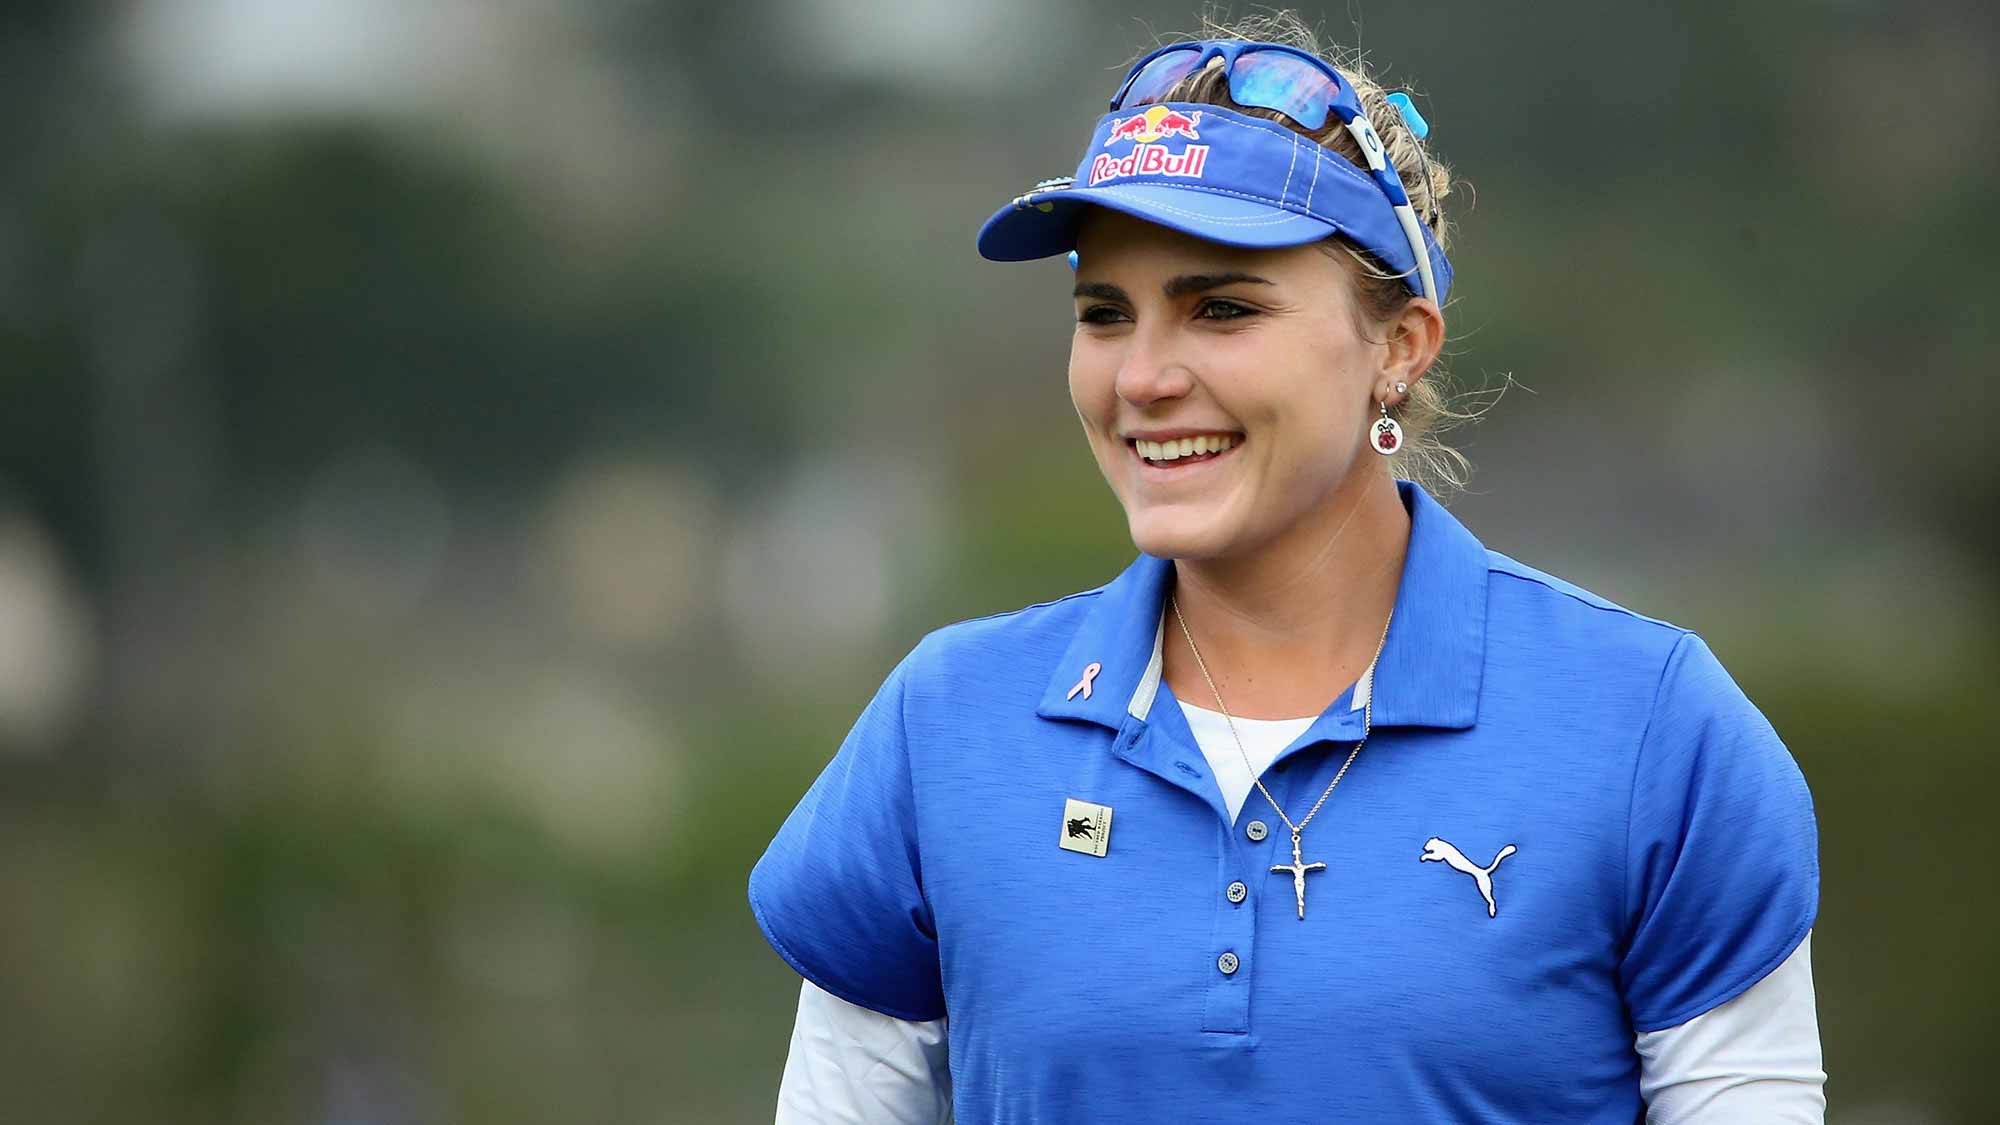 Lexi Thompson smiles on the 12th green during round two of the Swinging Skirts LPGA Classic at Lake Merced Golf Club